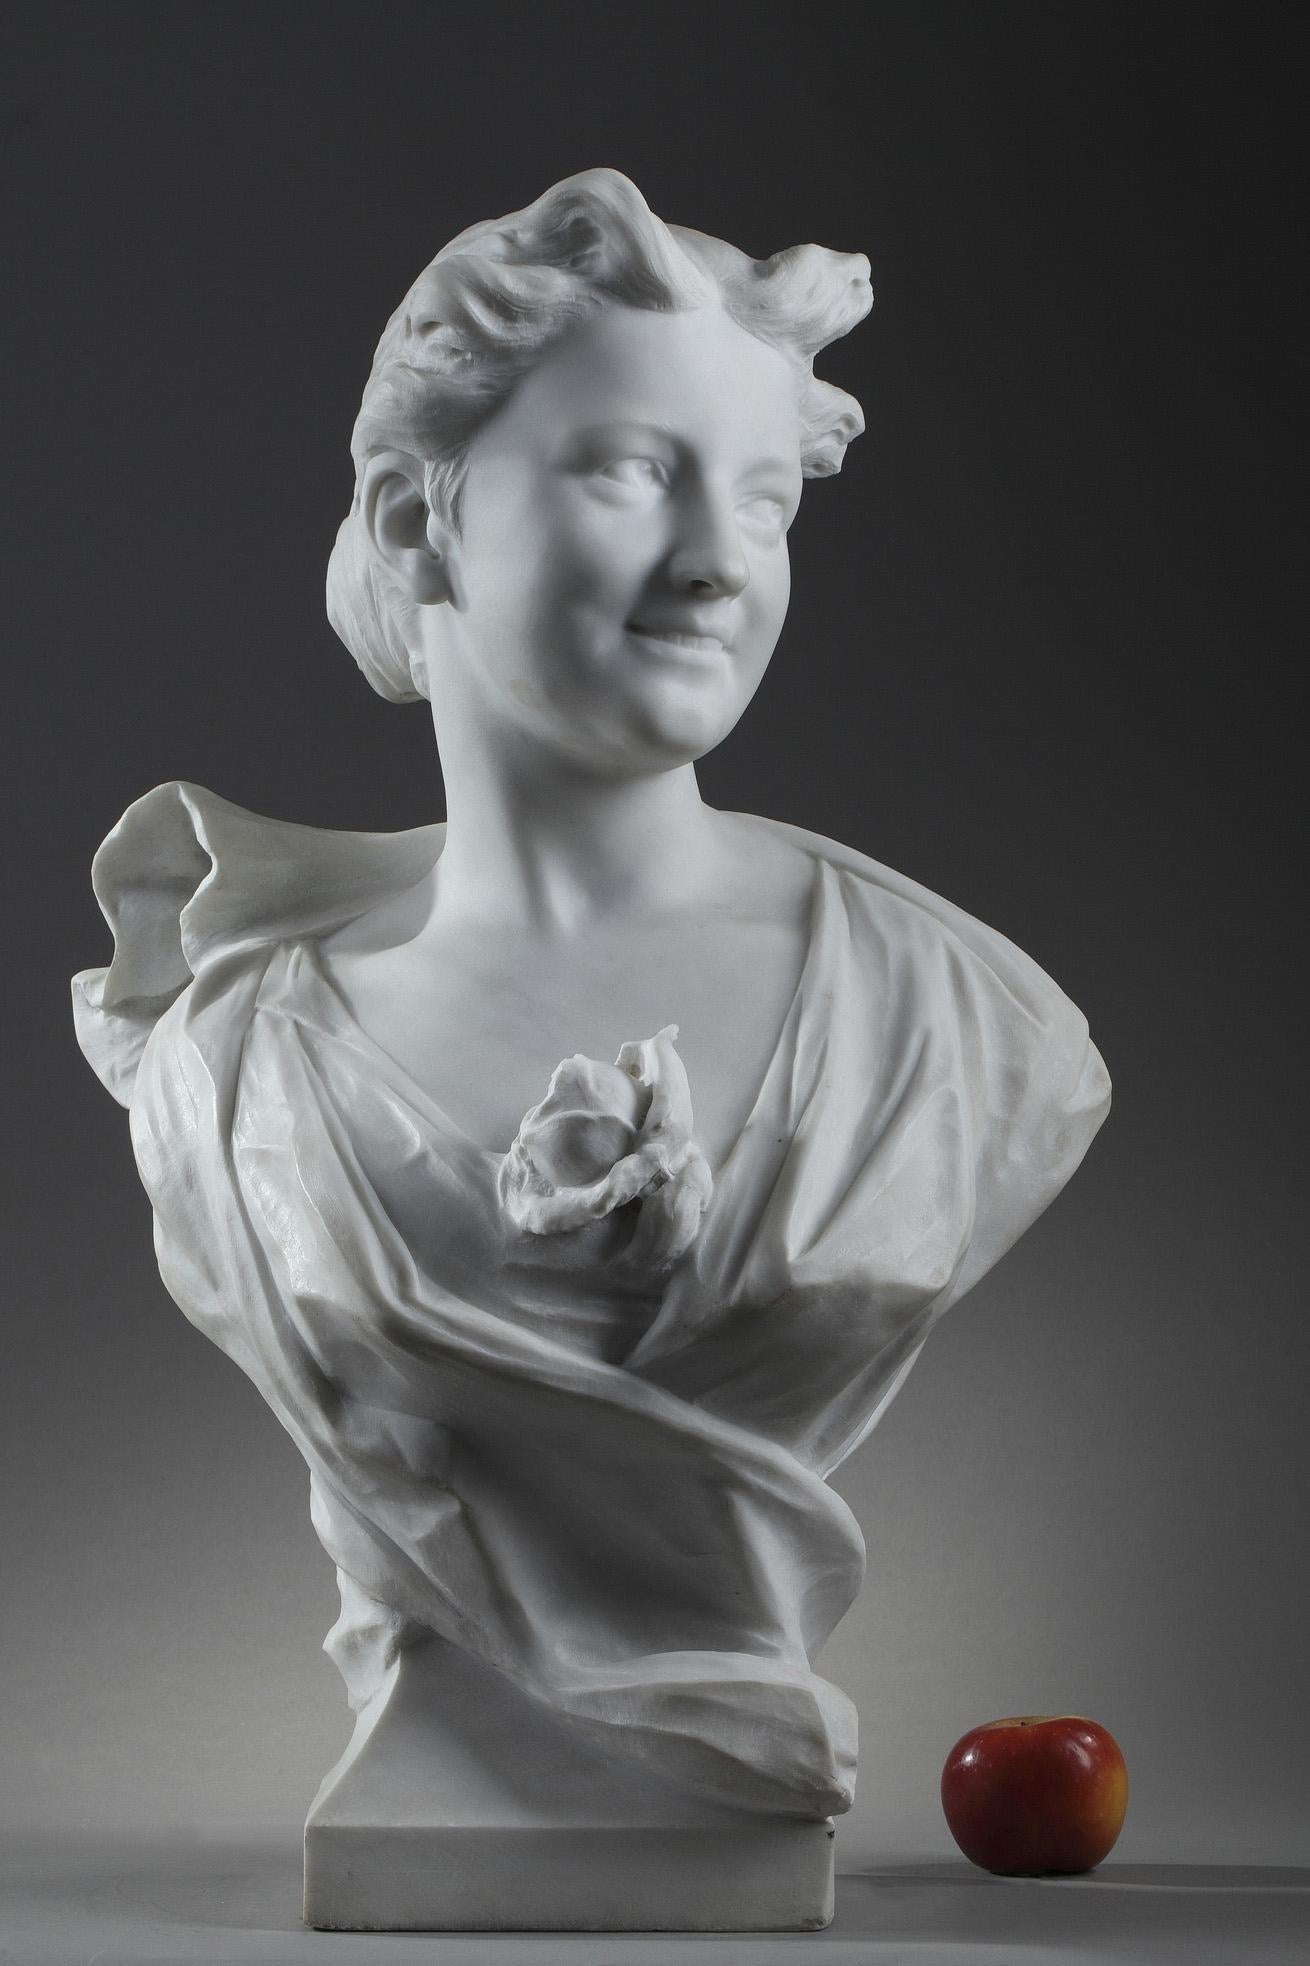 Late 19th century marble sculpture in the taste of Albert Carrier-Belleuse (1824-1887), featuring the bust of a young woman wearing a dress decorated with flower. Her curly hair is carefully put up in a bun. Her smiling and expressive face is turned